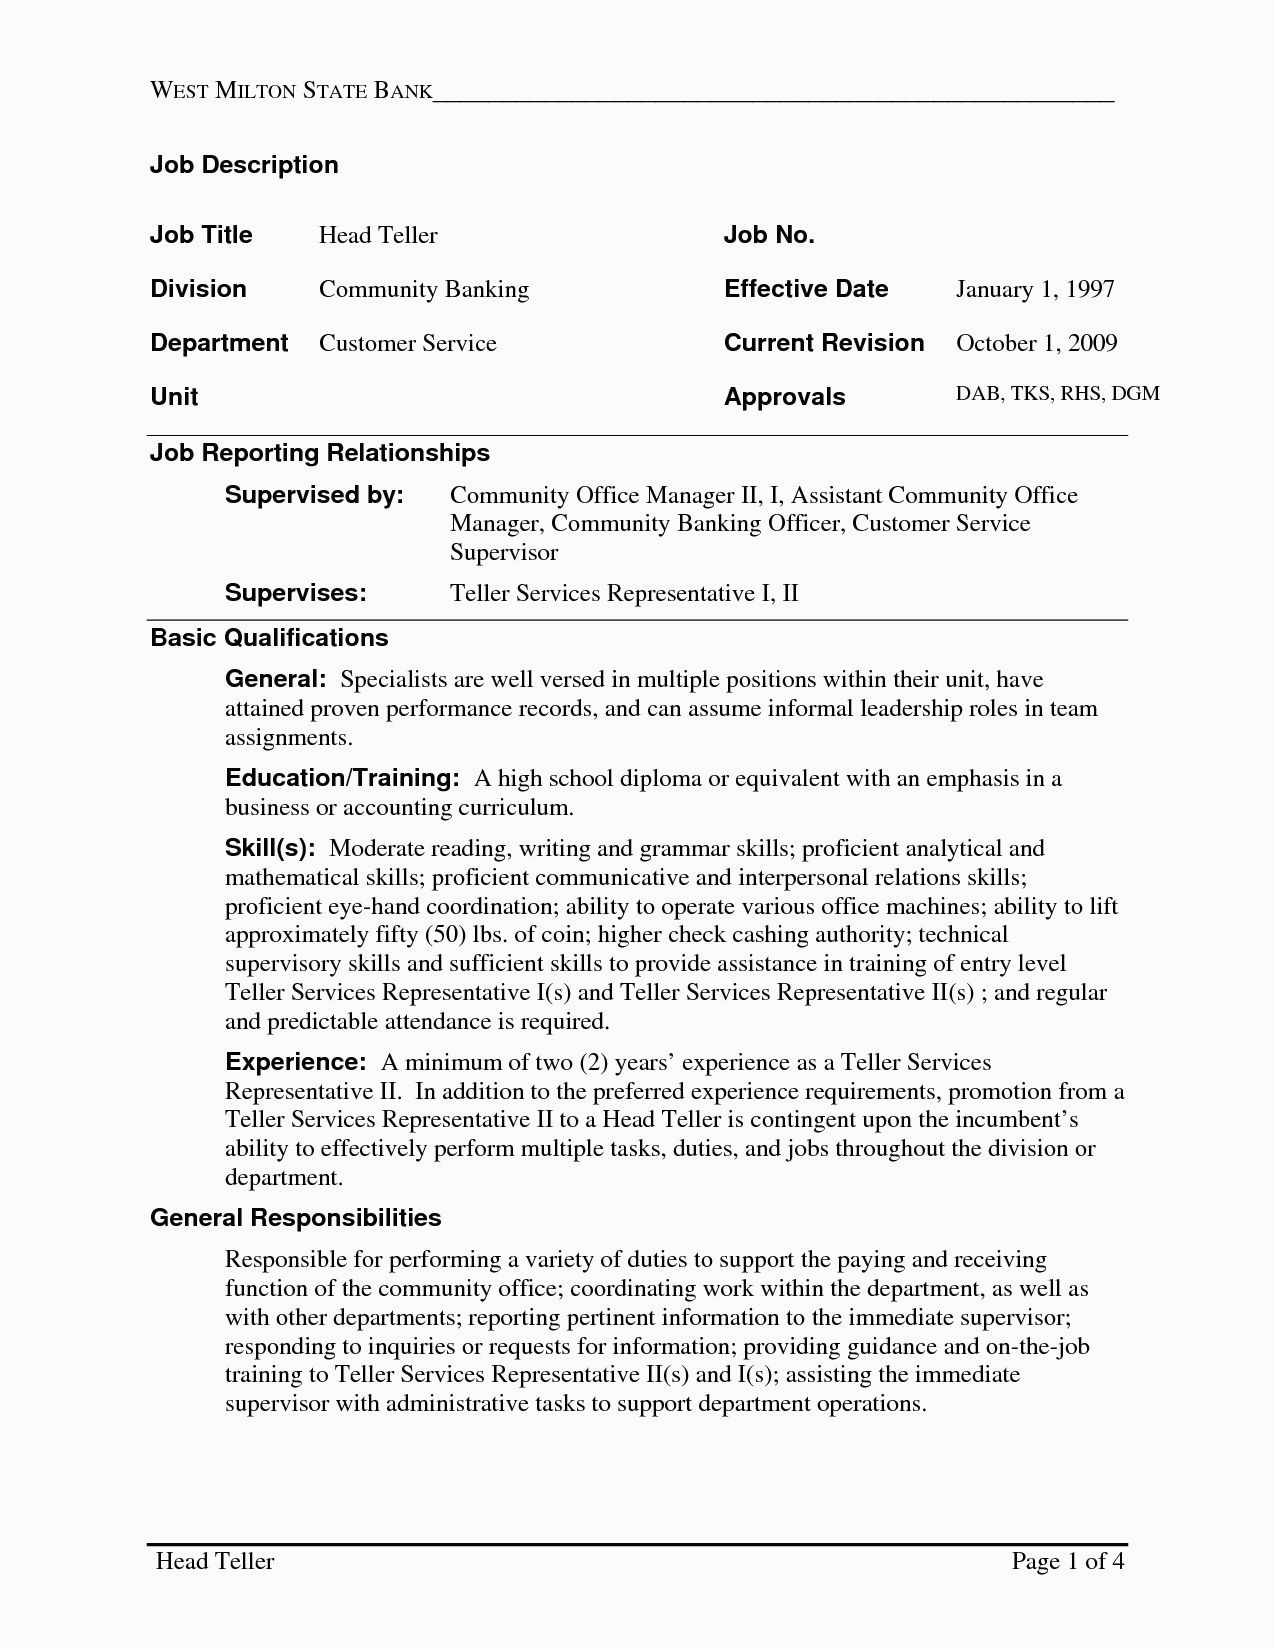 Bank Teller Resume Templates No Experience Pin by Calendar 2019 2020 On Latest Resume